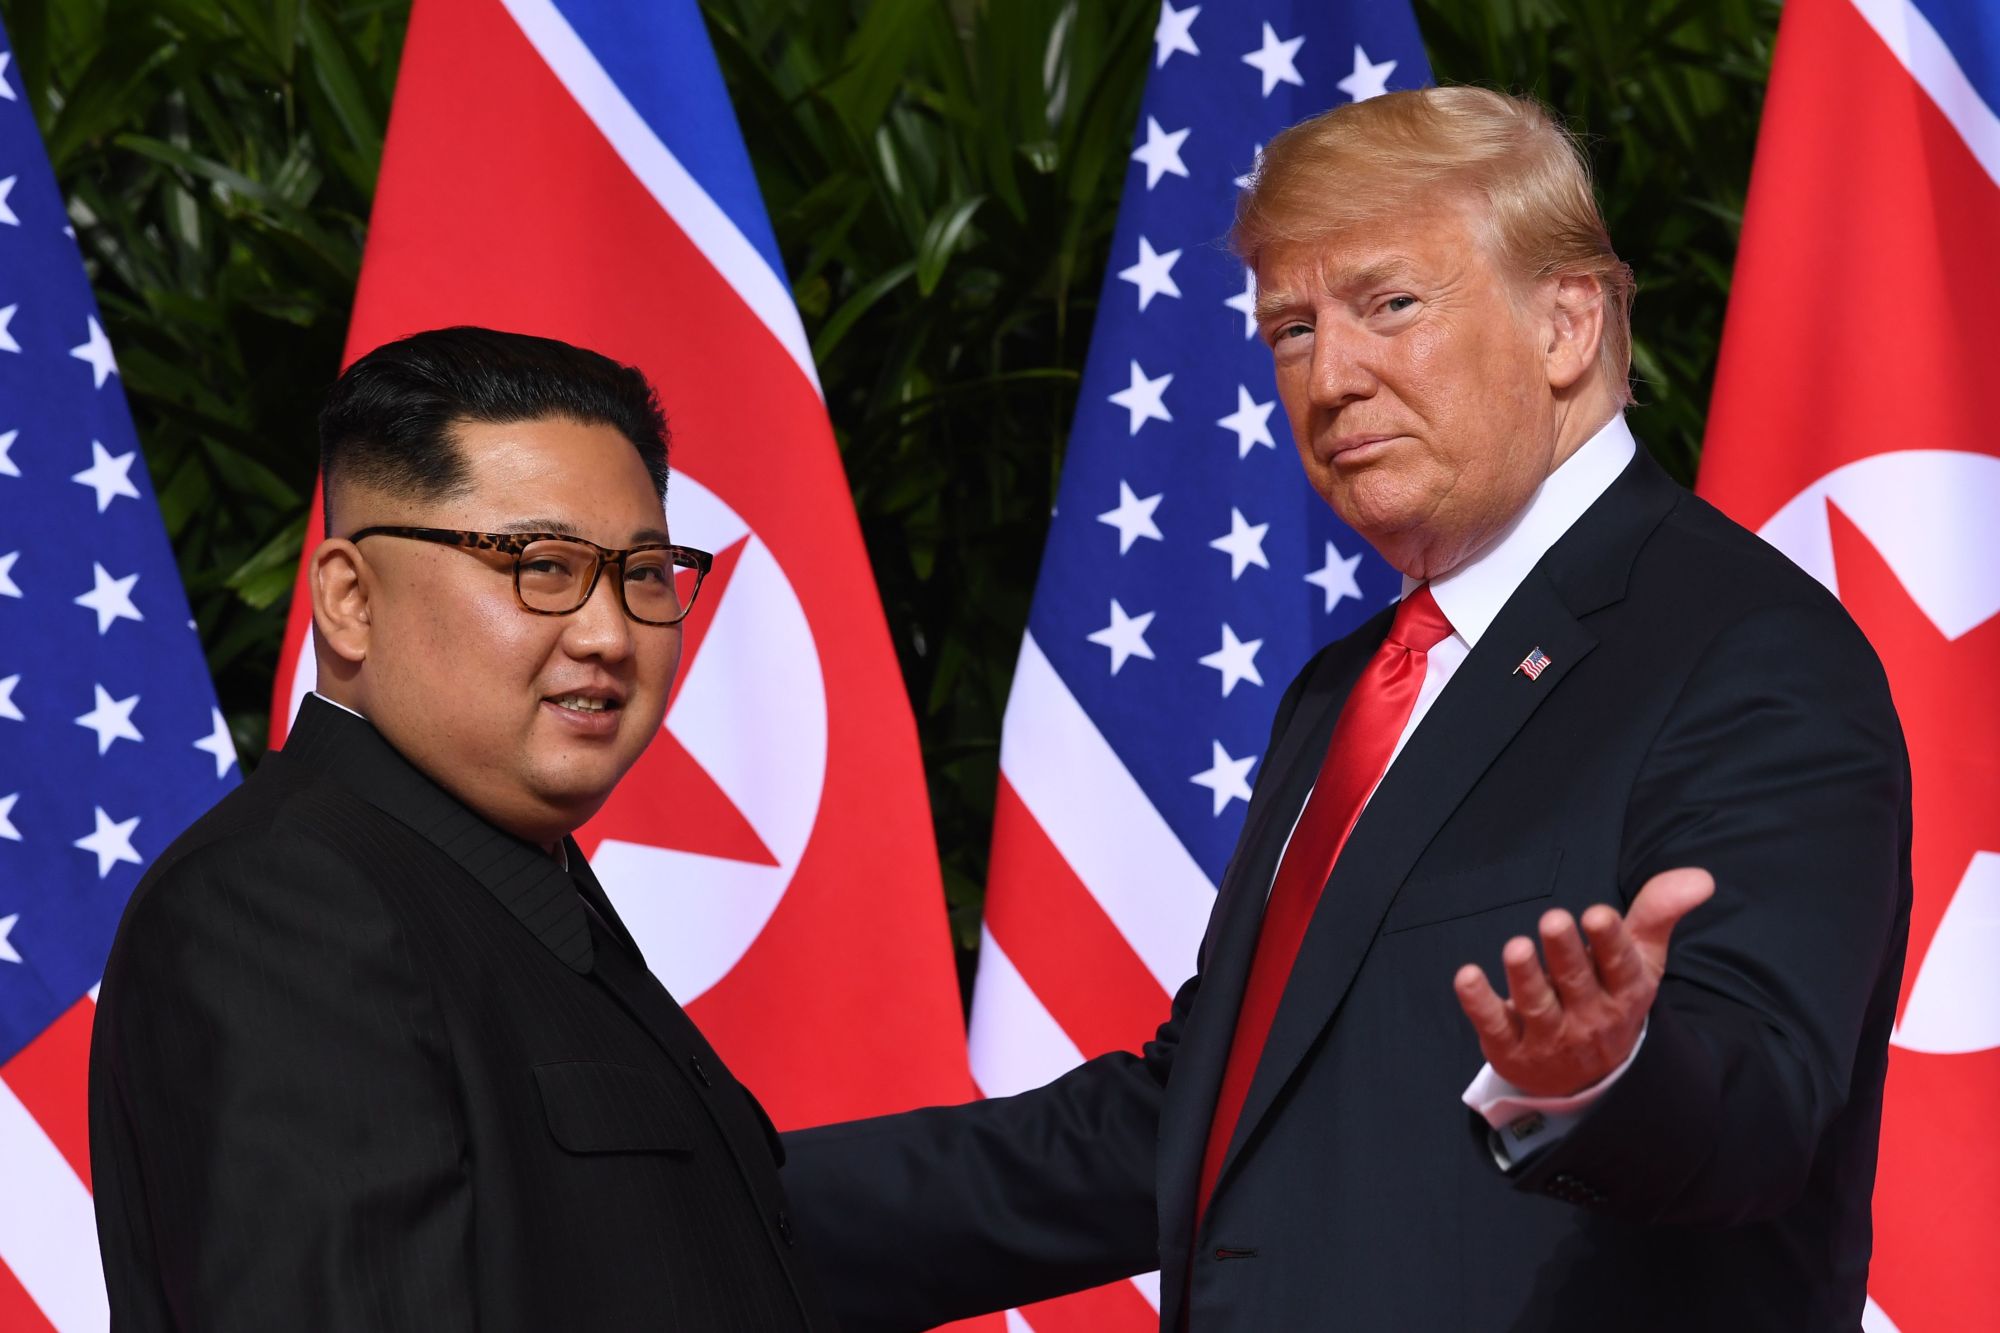 U.S. President Donald Trump gestures as he meets with North Korean leader Kim Jong Un at the start of their historic U.S.-North Korea summit at the Capella Hotel on Sentosa island in Singapore last June. Trump said Sunday negotiations are underway on the location of the next summit with Kim. | AFP-JIJI